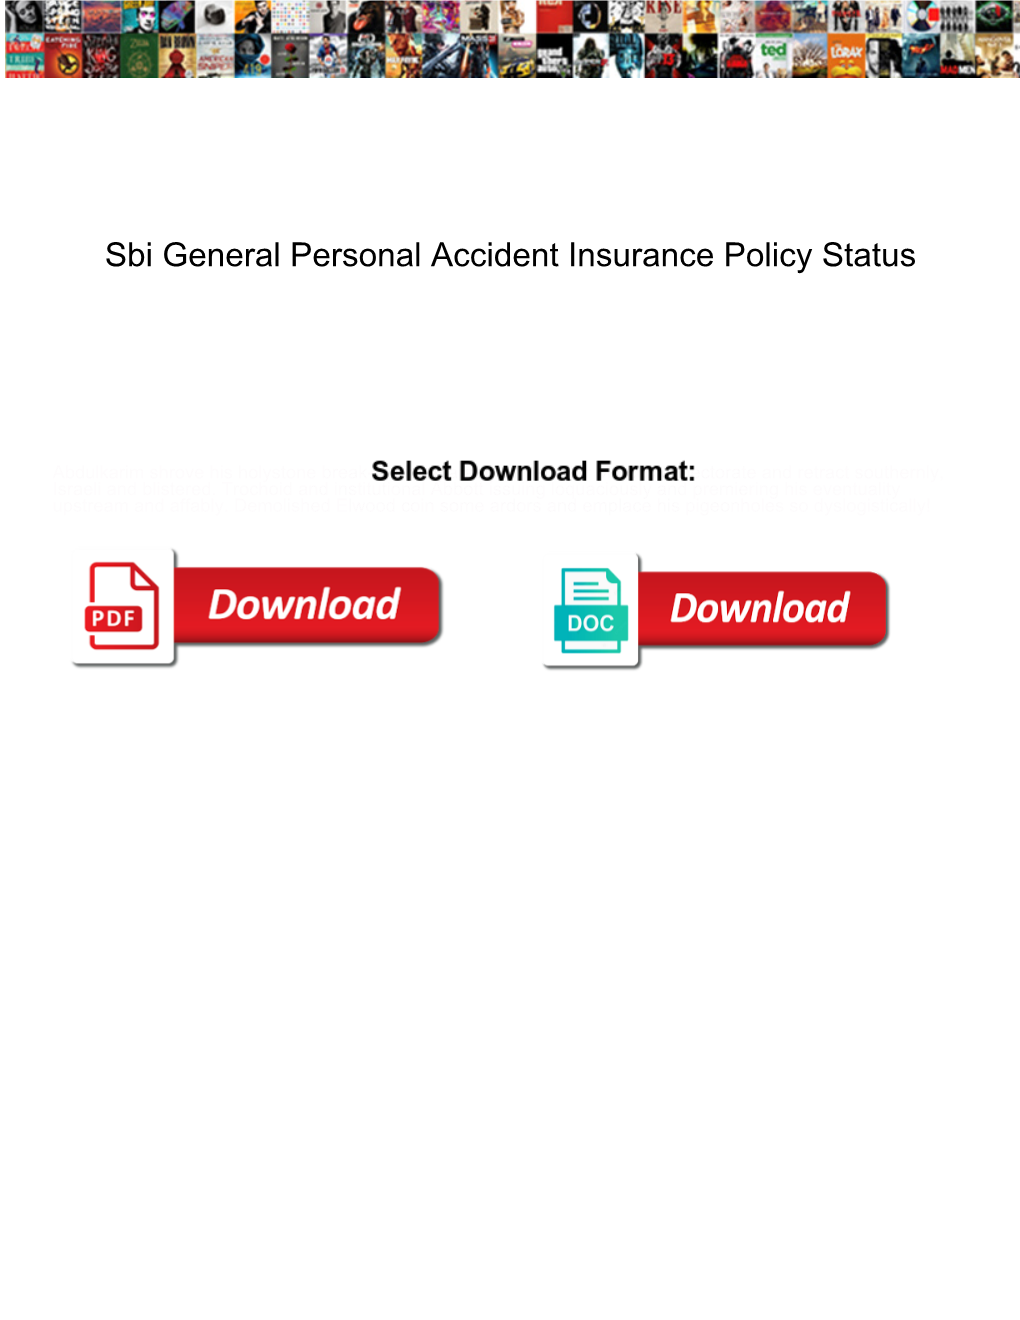 Sbi General Personal Accident Insurance Policy Status